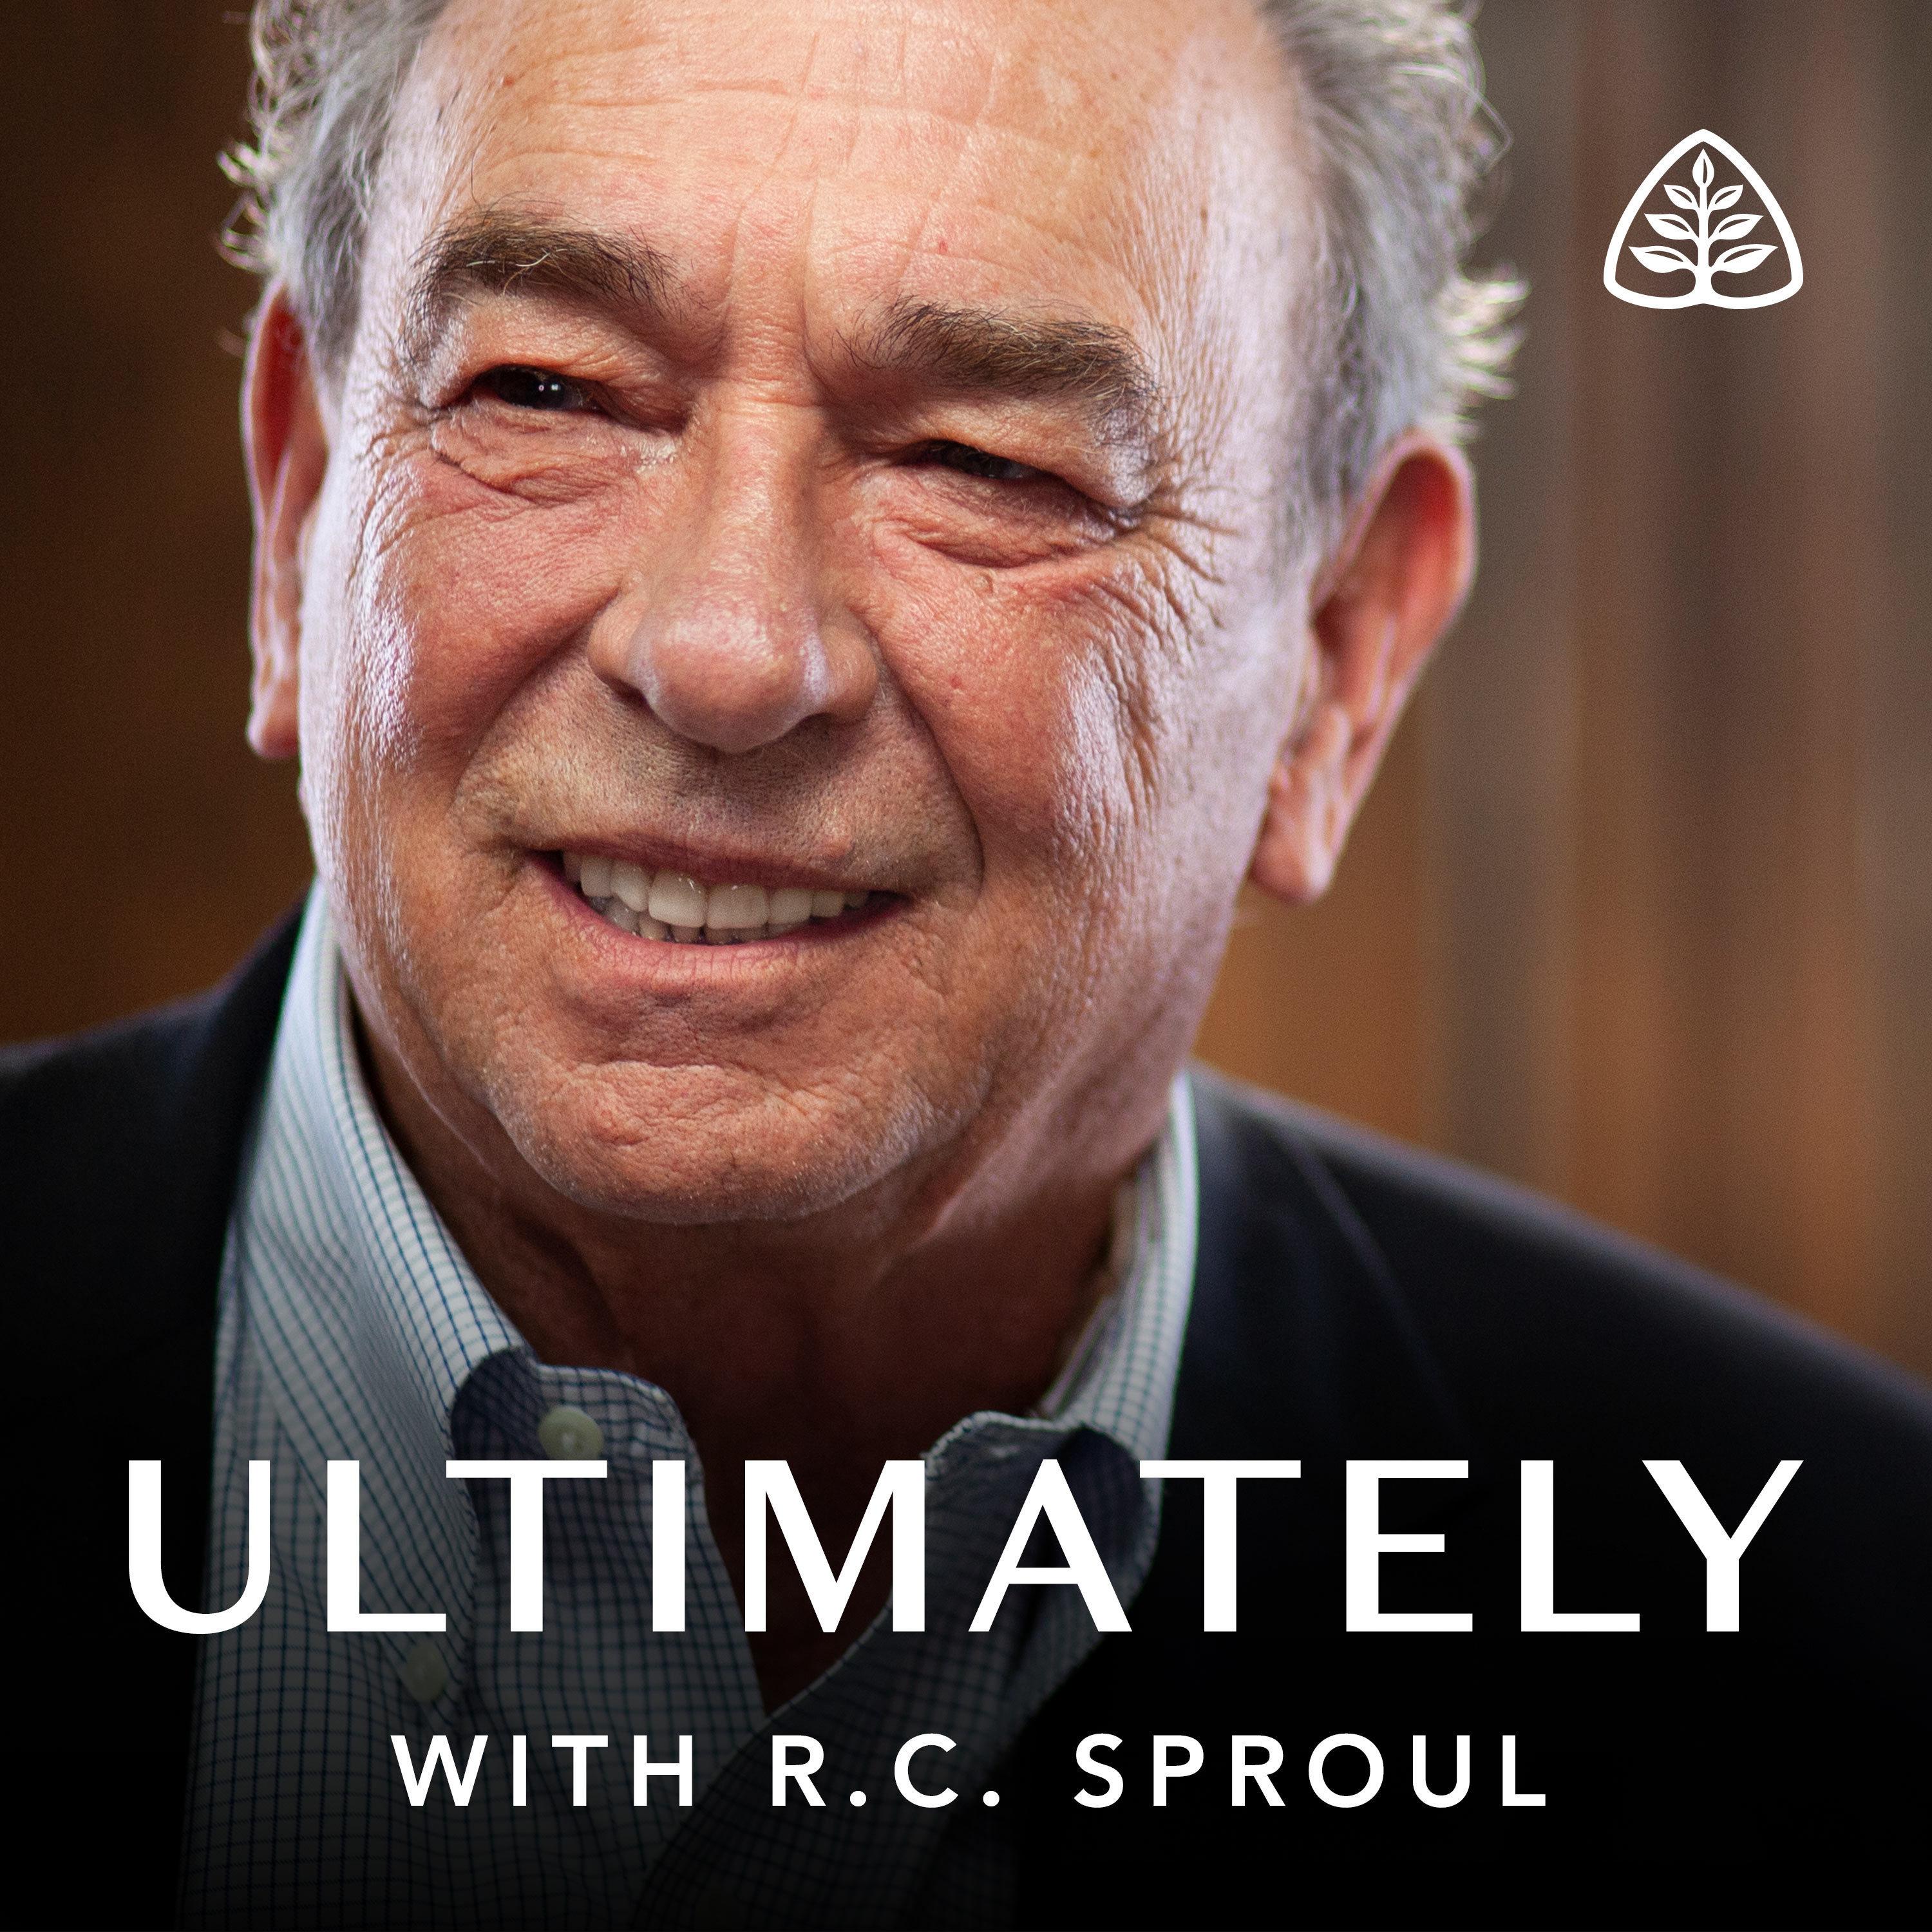 Art for The Gift of Faith by R.C. Sproul